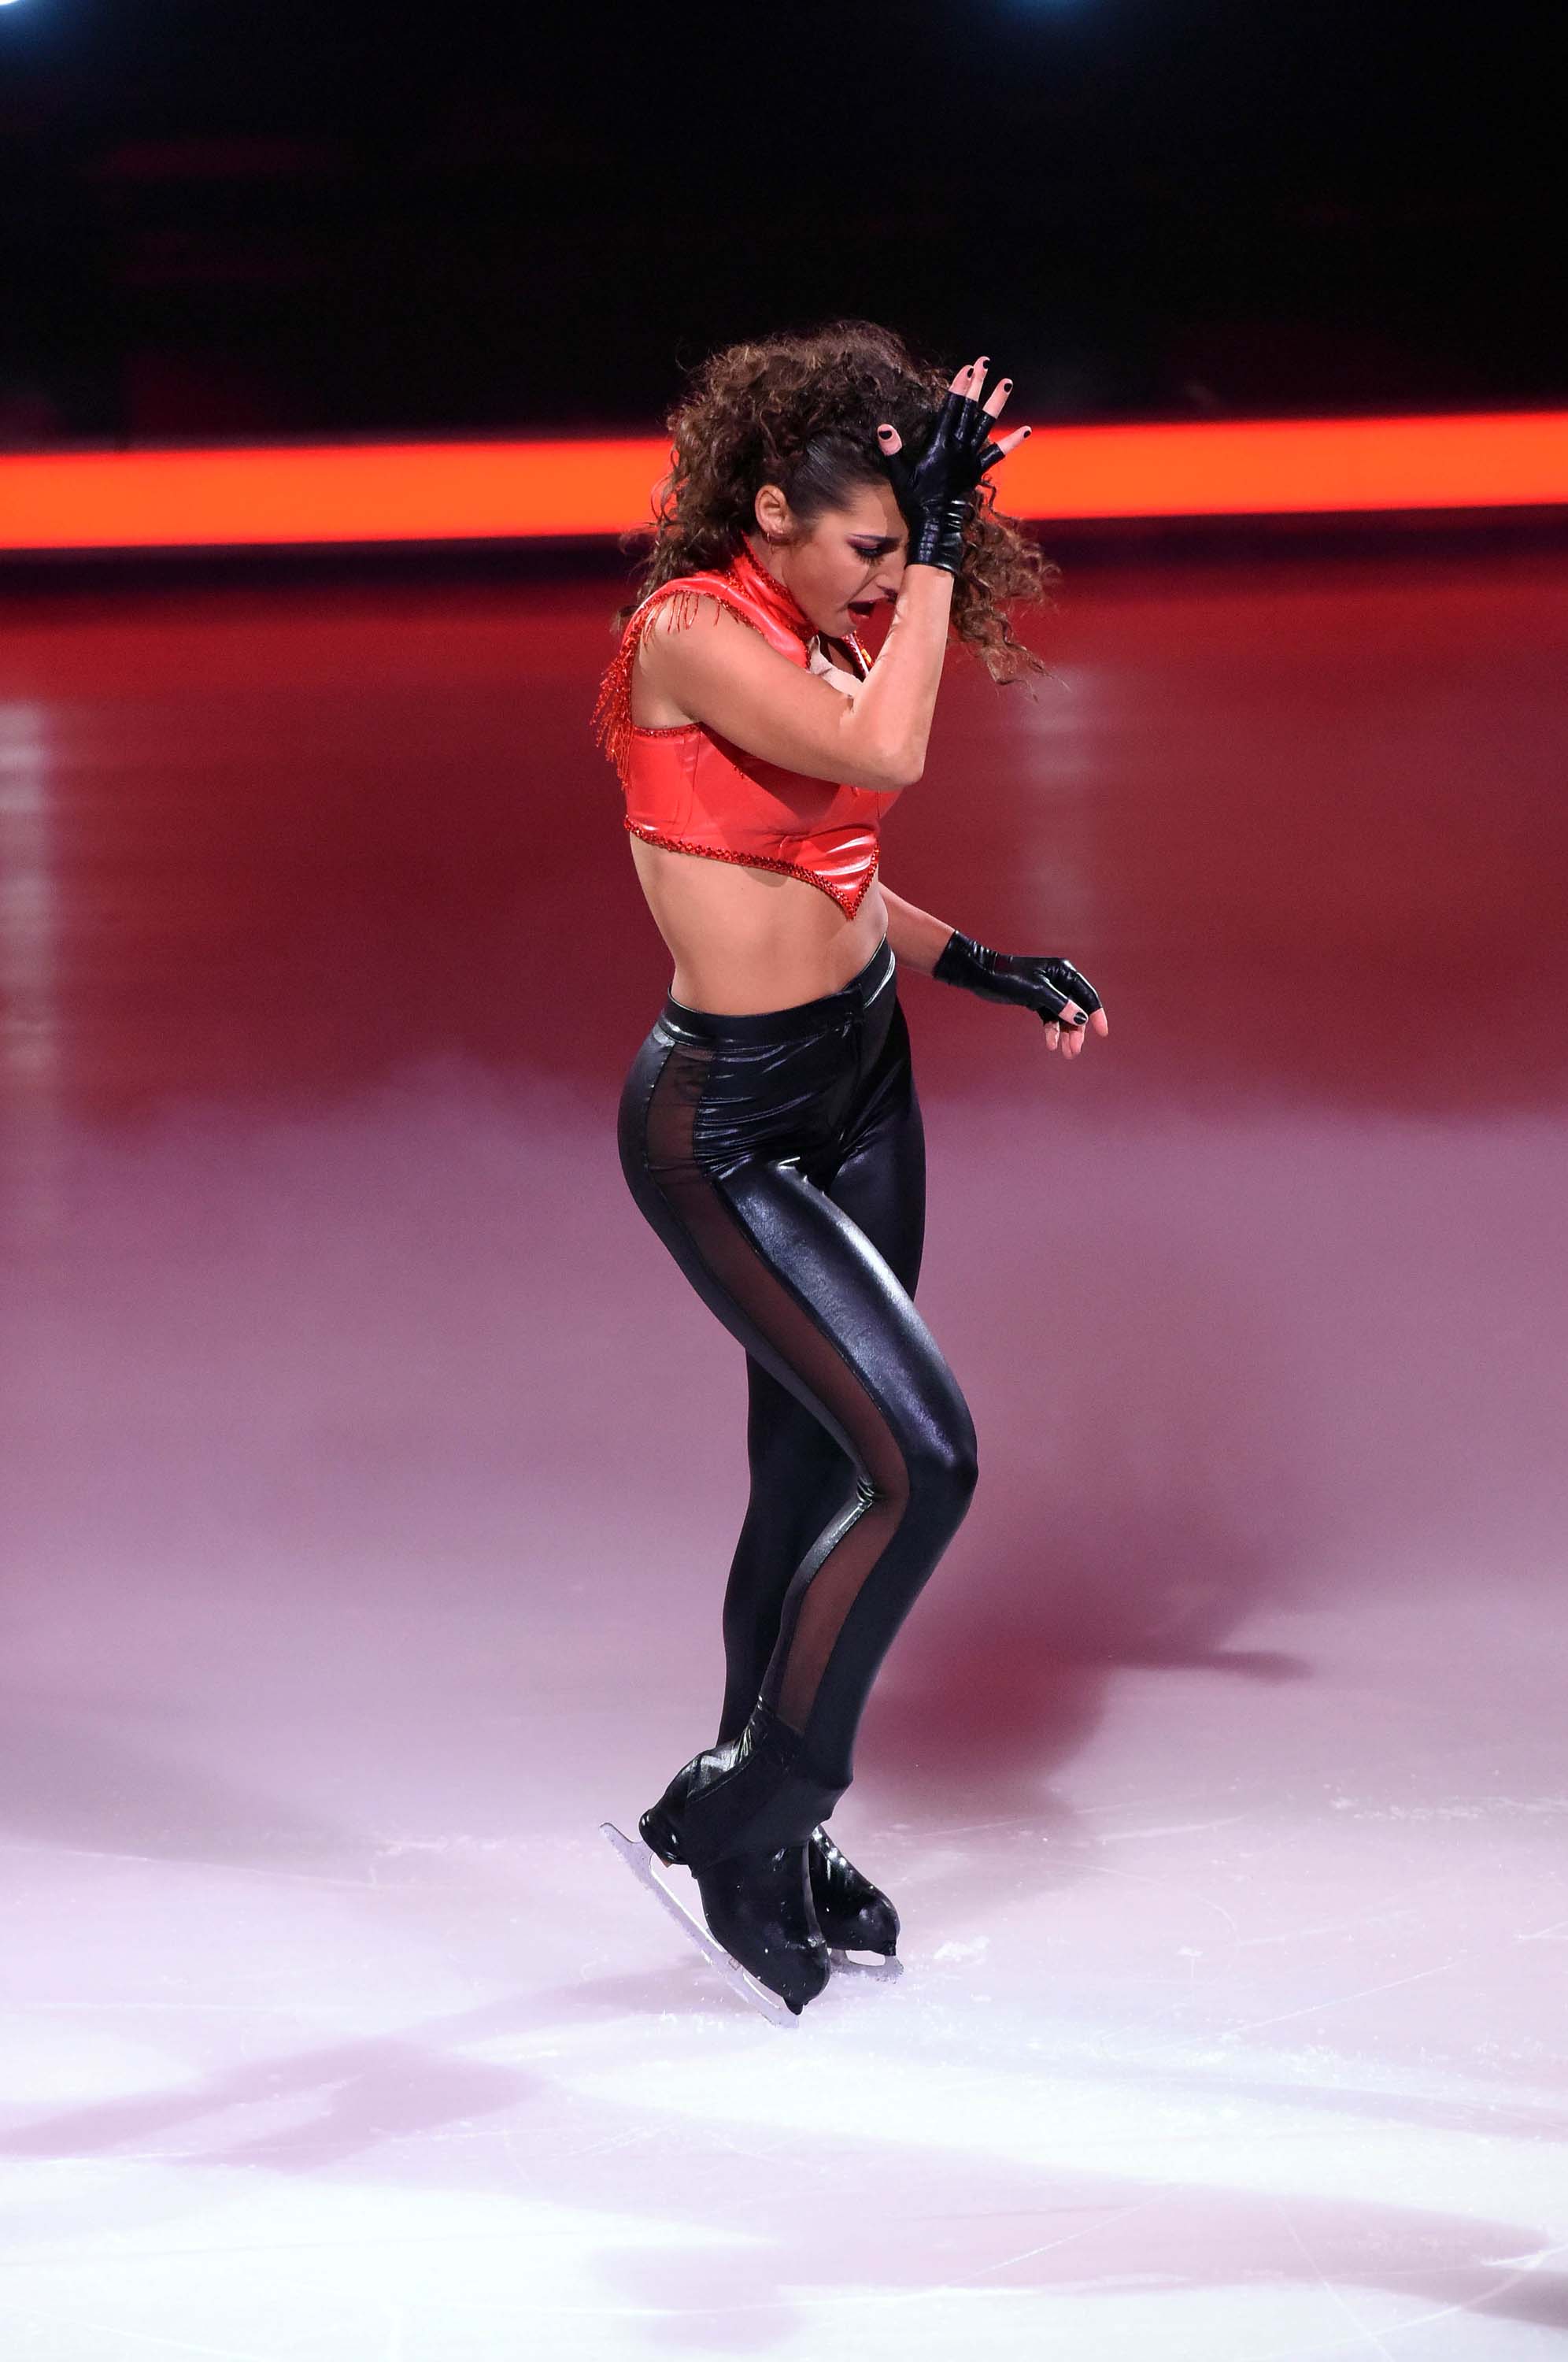 Sarah Lombardi attends Sat.1 Live TV Show ‘Dancing on Ice’